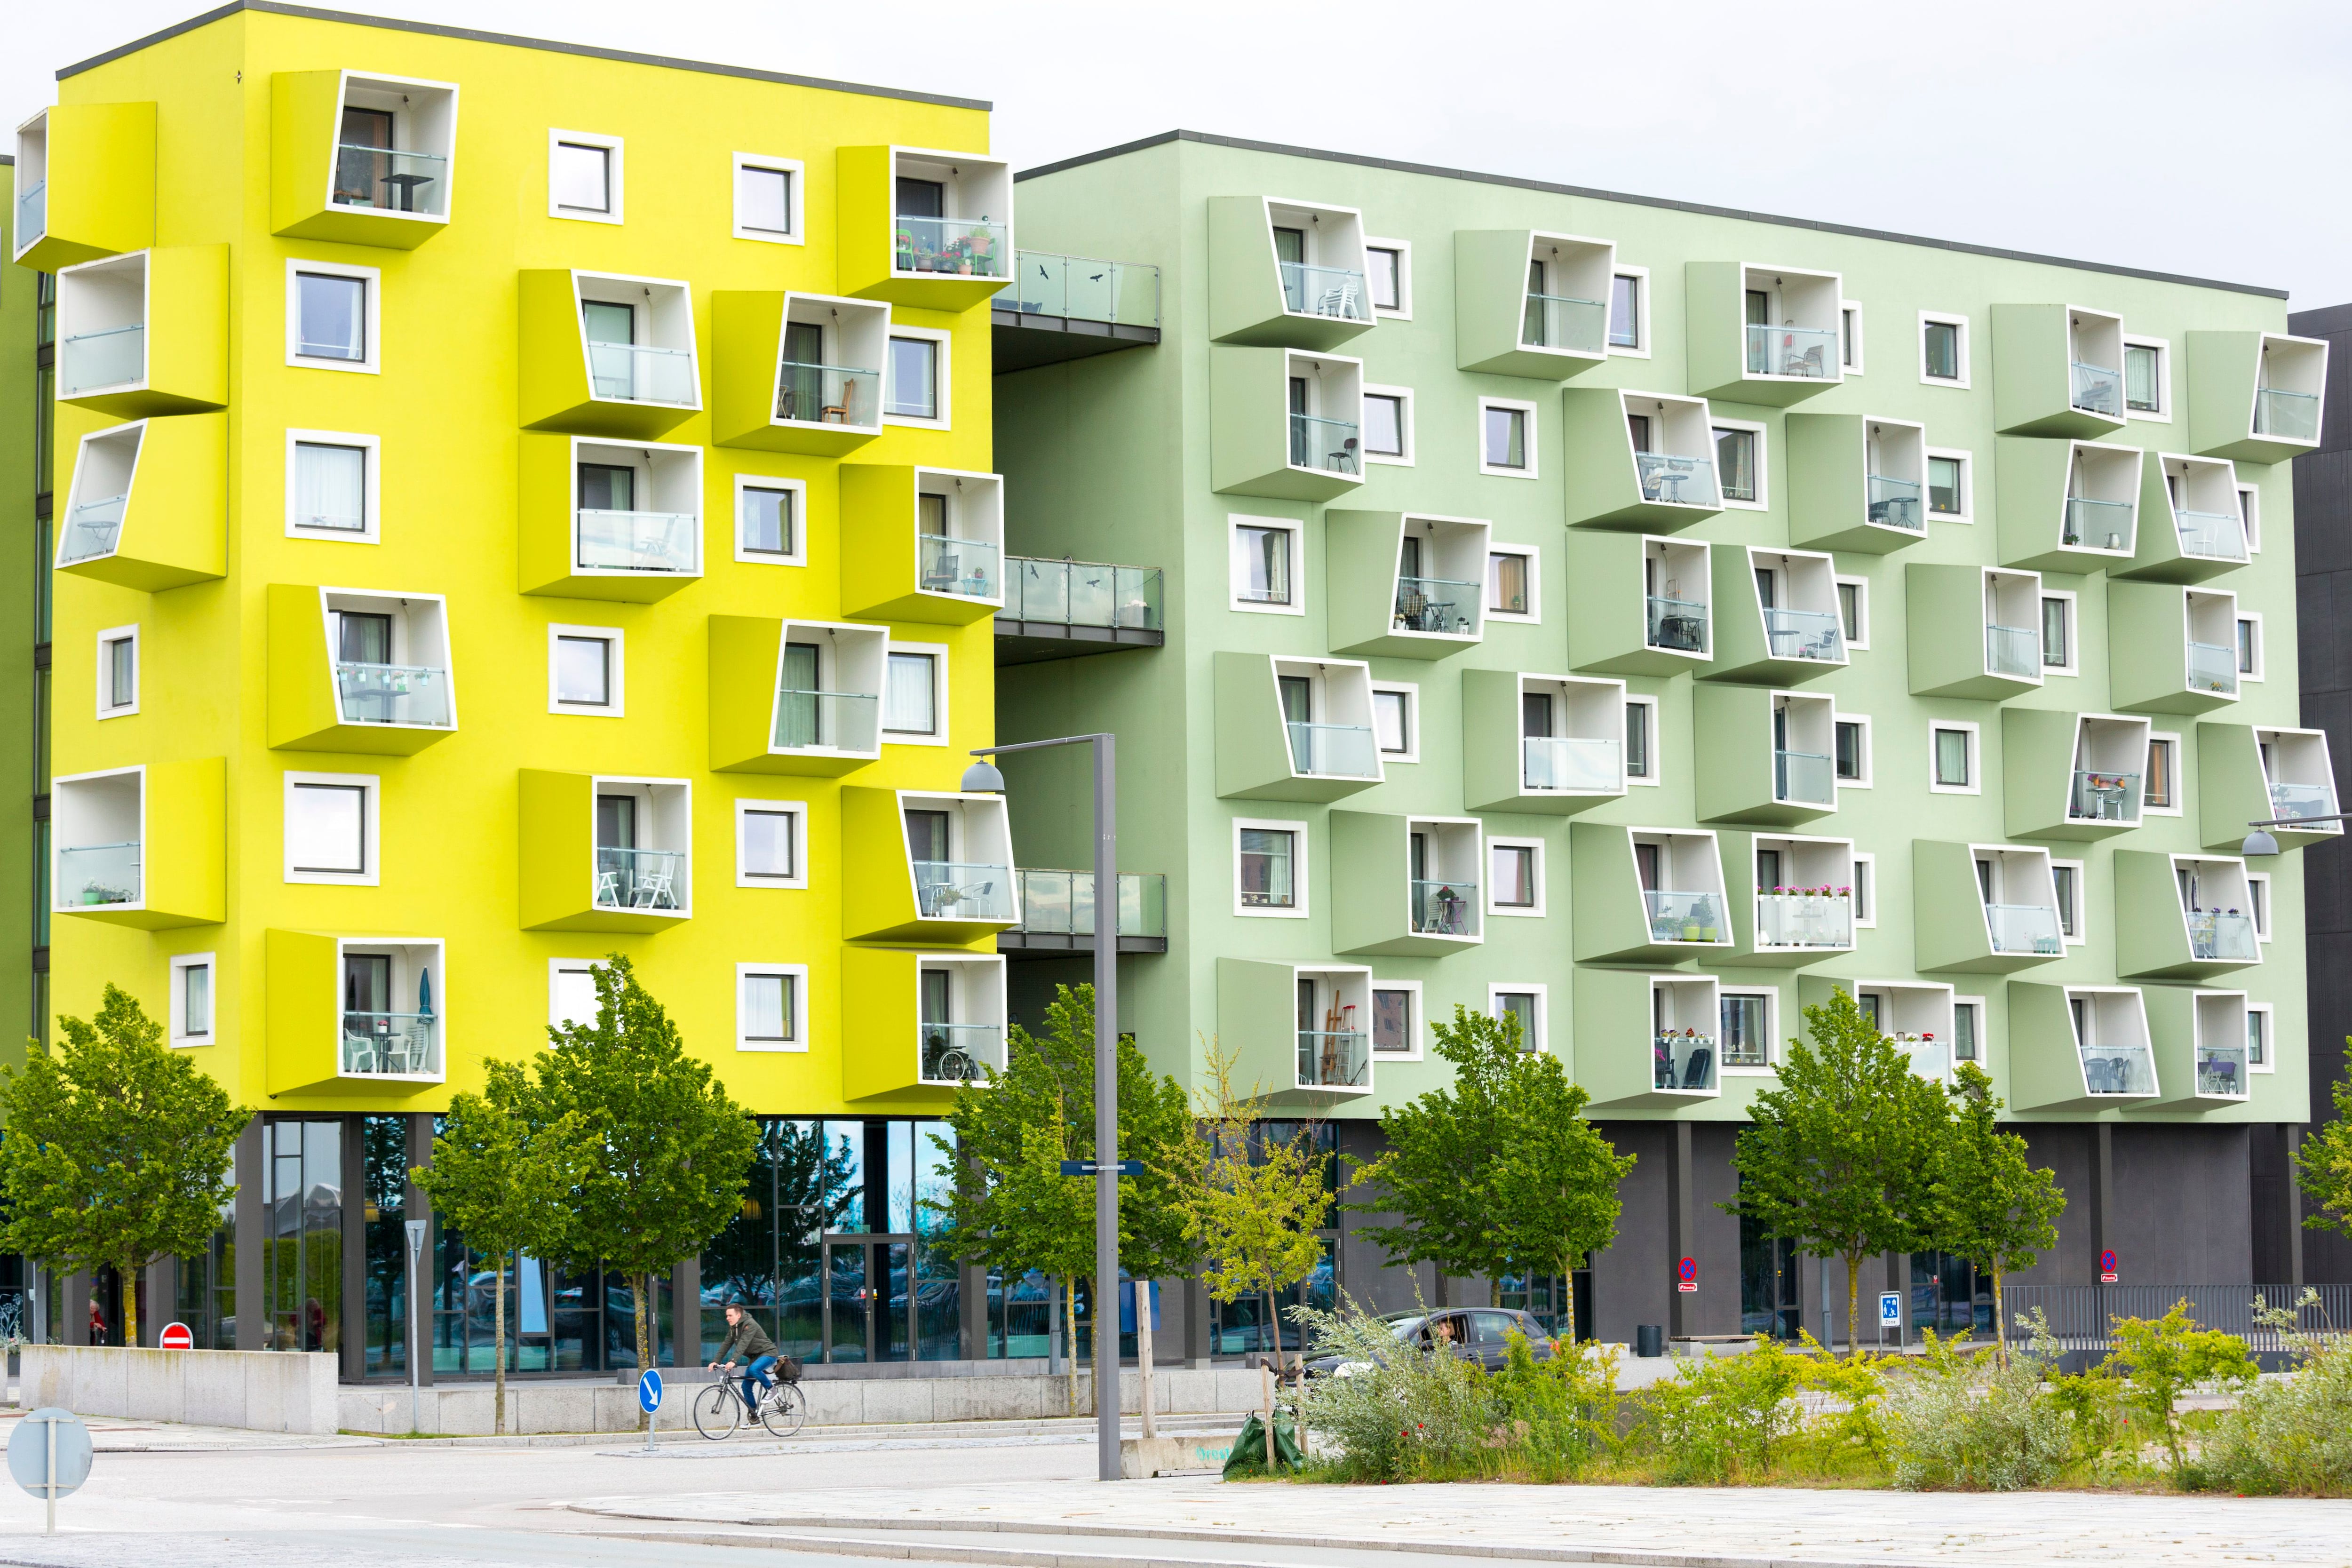 Ørestad is a neighborhood frequently visited by lovers of contemporary architecture (Photo by Tim Graham/Getty Images)